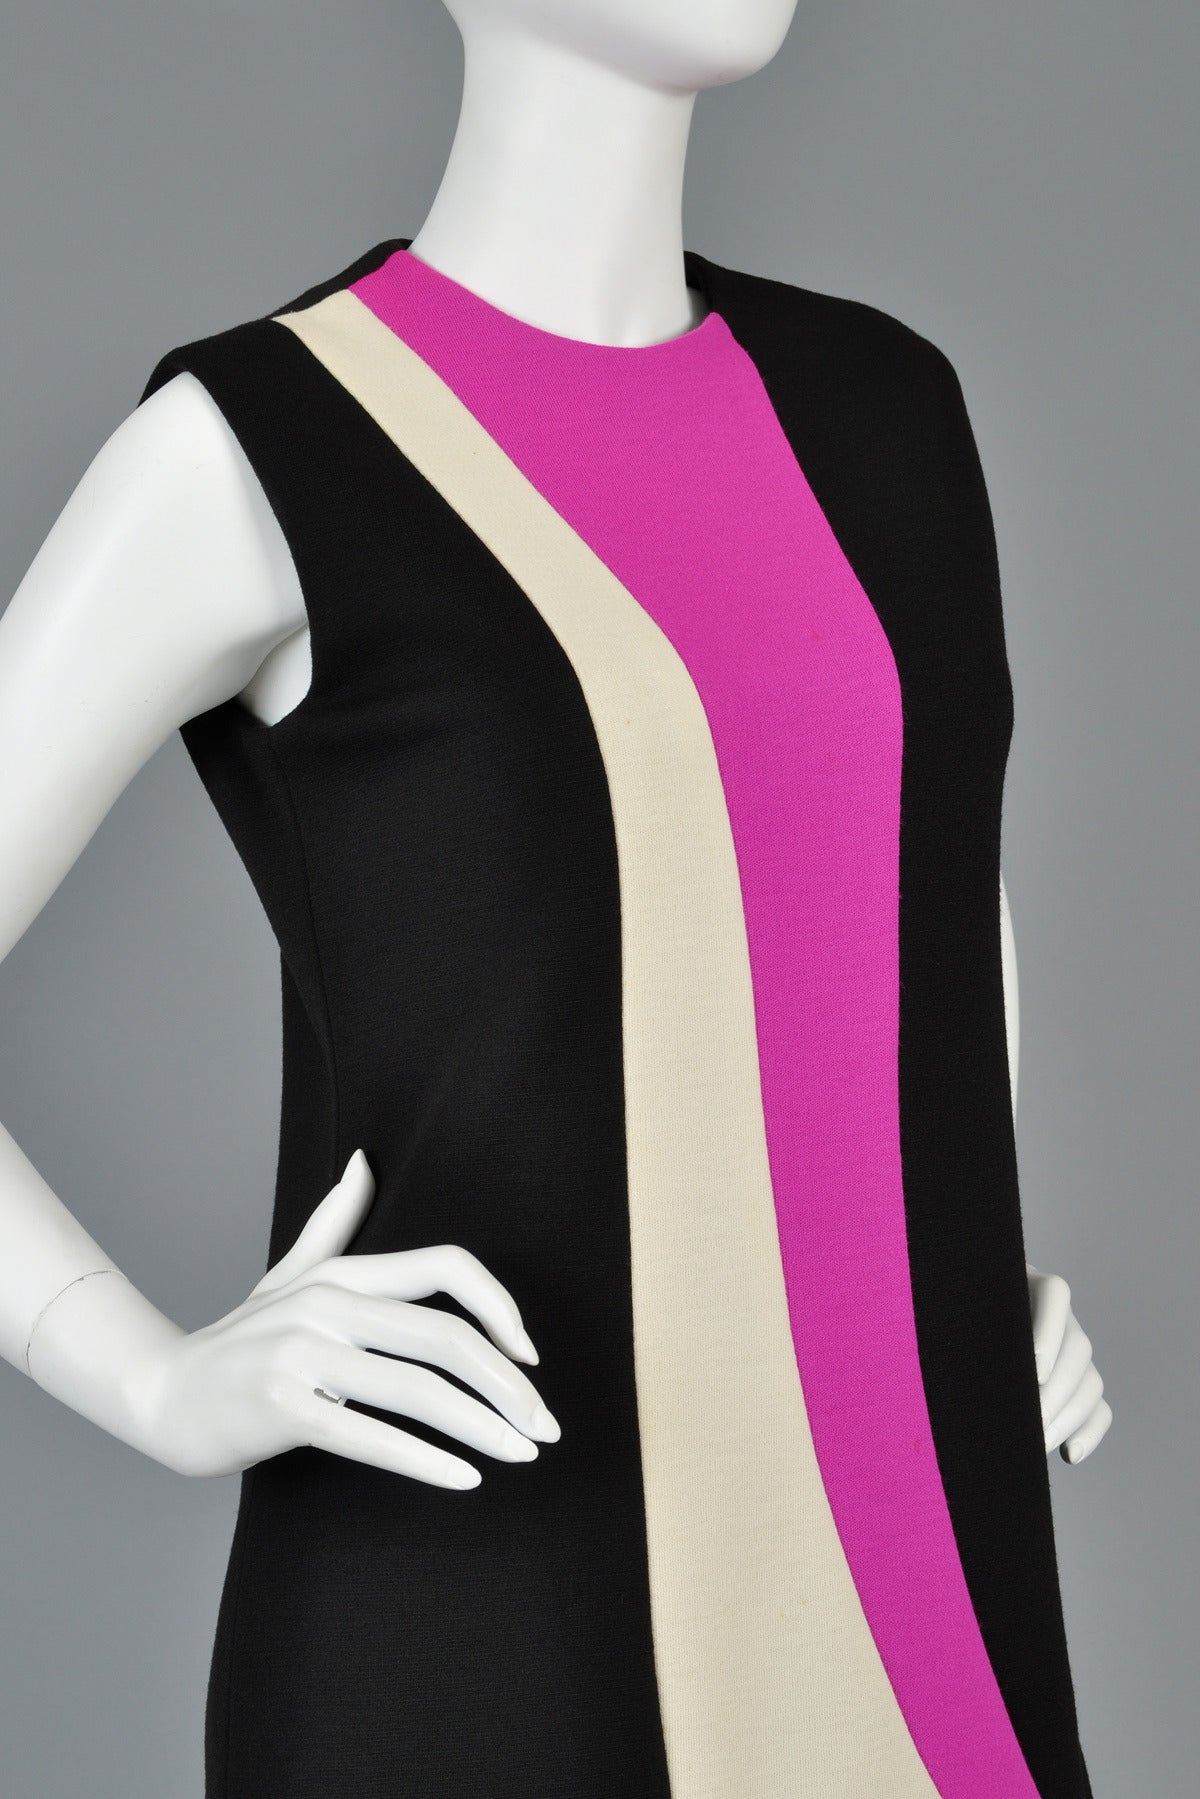 Pierre Cardin 1960s Color Blocked Couture Tunic Dress 1